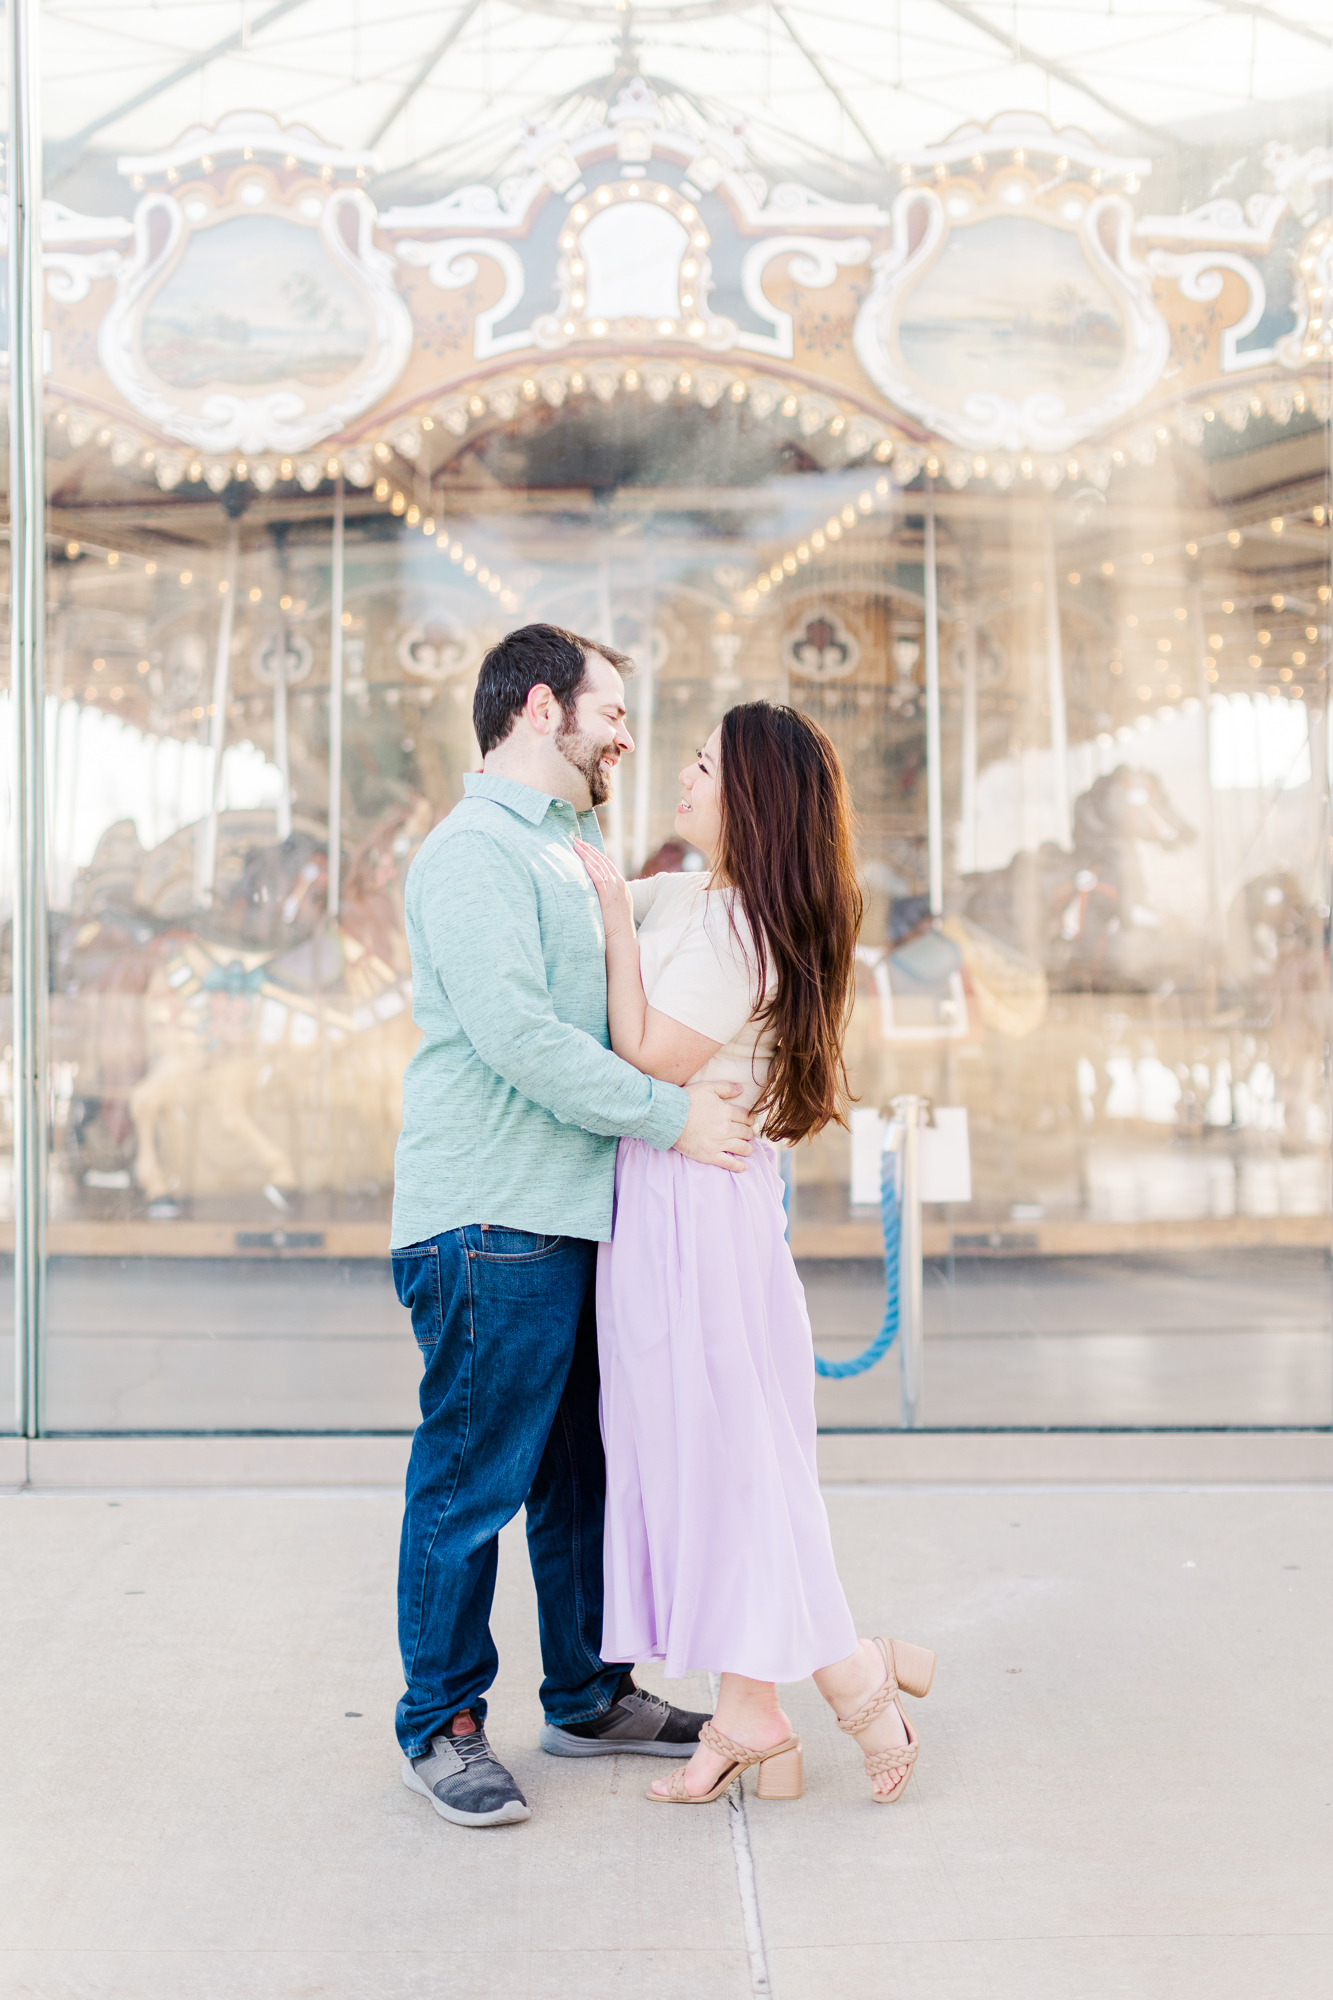 Elegant Brooklyn Bridge Engagement Photography with Matching Outfits